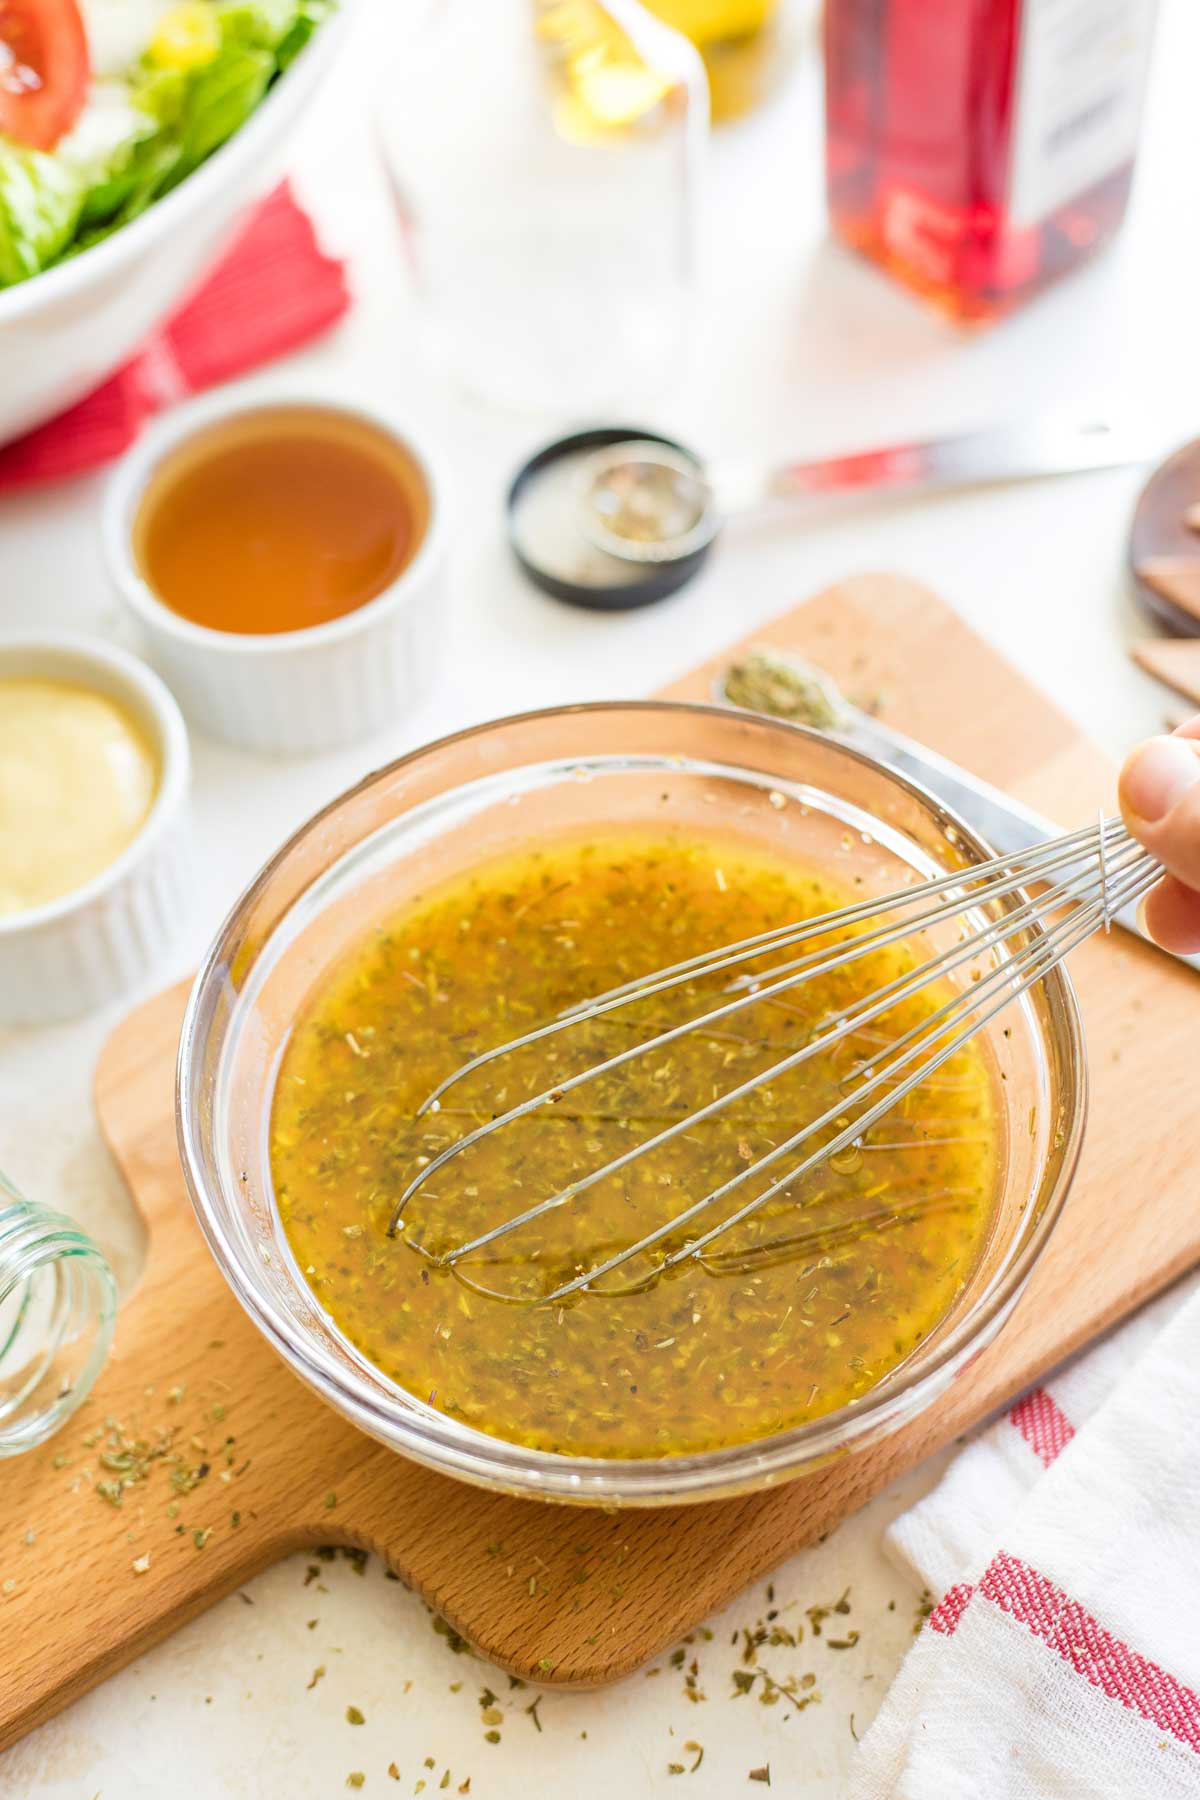 Hand holding whisk in bowl of dressing with ingredients and measuring spoons surrounding.